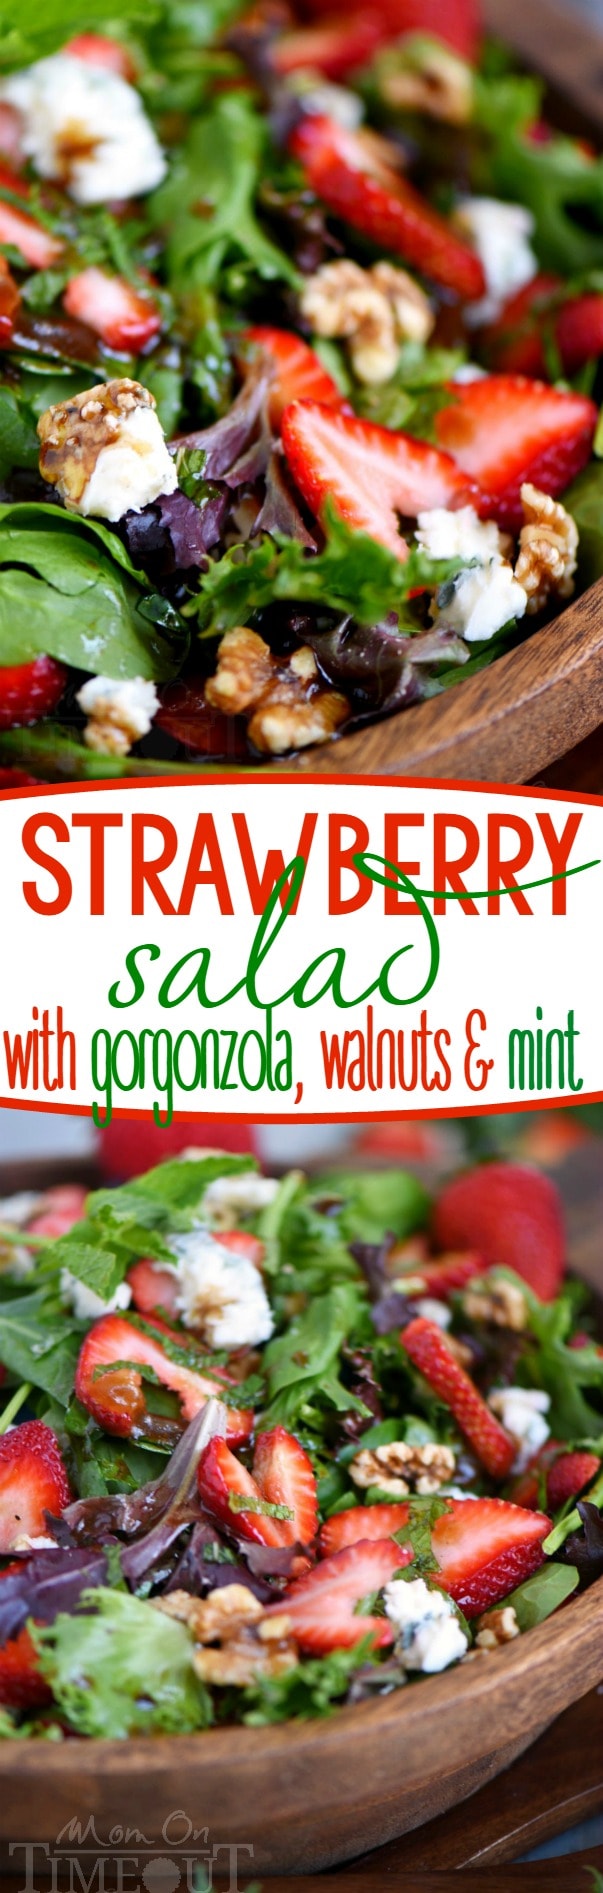 Feast your eyes on this stunning Strawberry Salad with Gorgonzola, Walnuts and Mint! It's a party in your mouth! The perfect summer salad that will keep you coming back again and again.